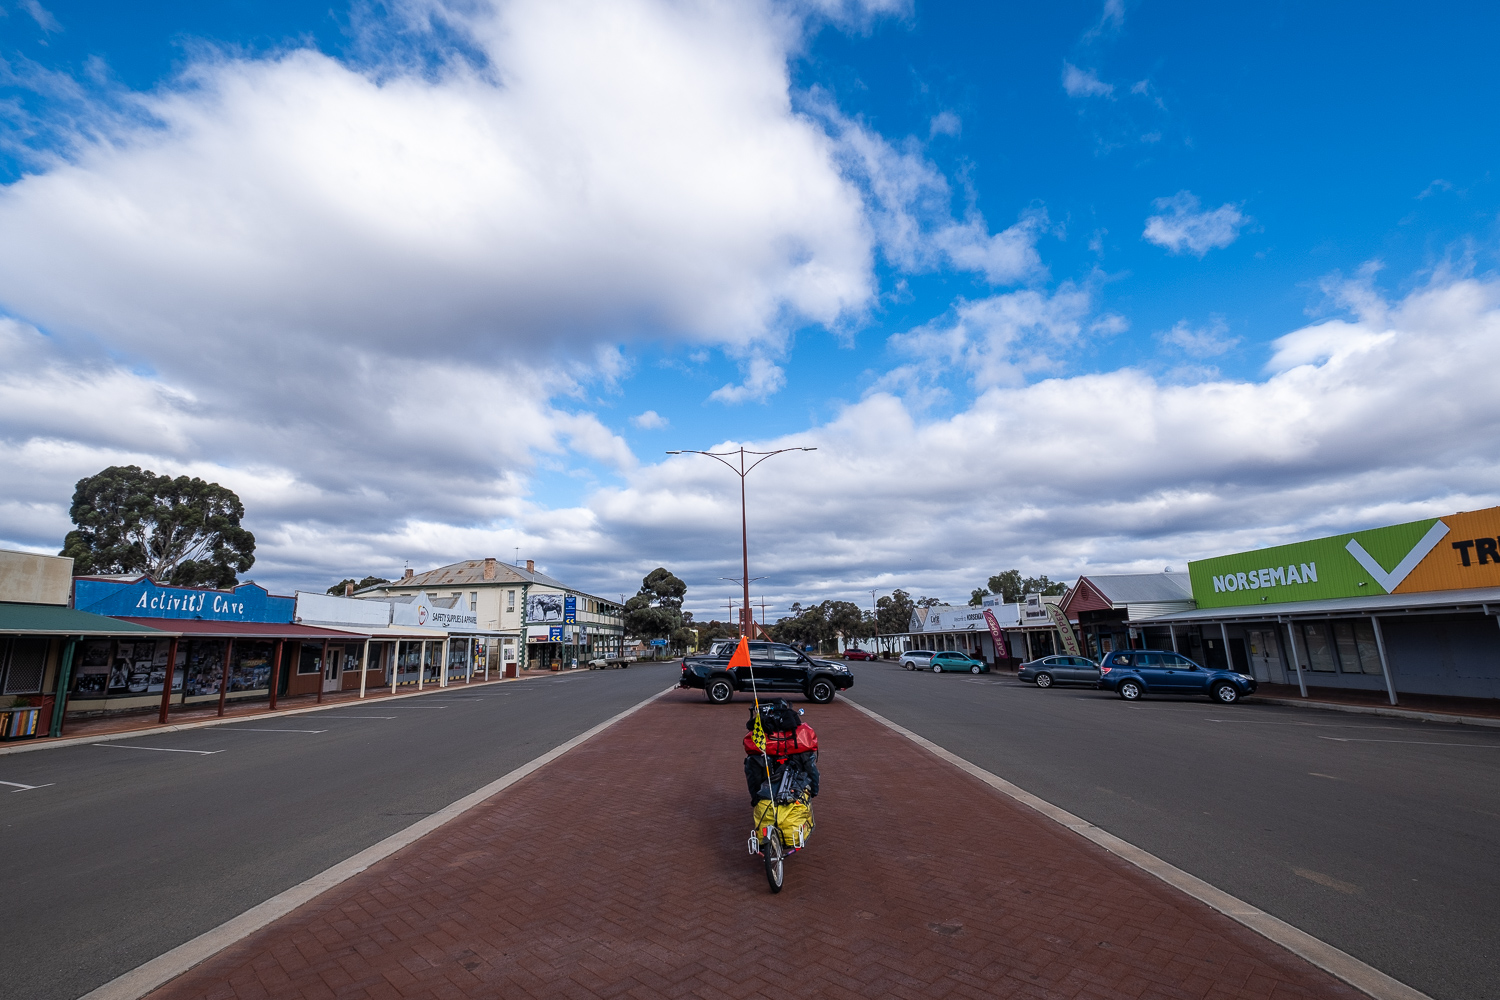  When I was planning my cycling trip from Norseman to Ceduna, I realized that it would be impossible to carry enough food and water to sustain me for the entire 1,200 km journey. Although some of the roadhouses along the way offered food and drink, t